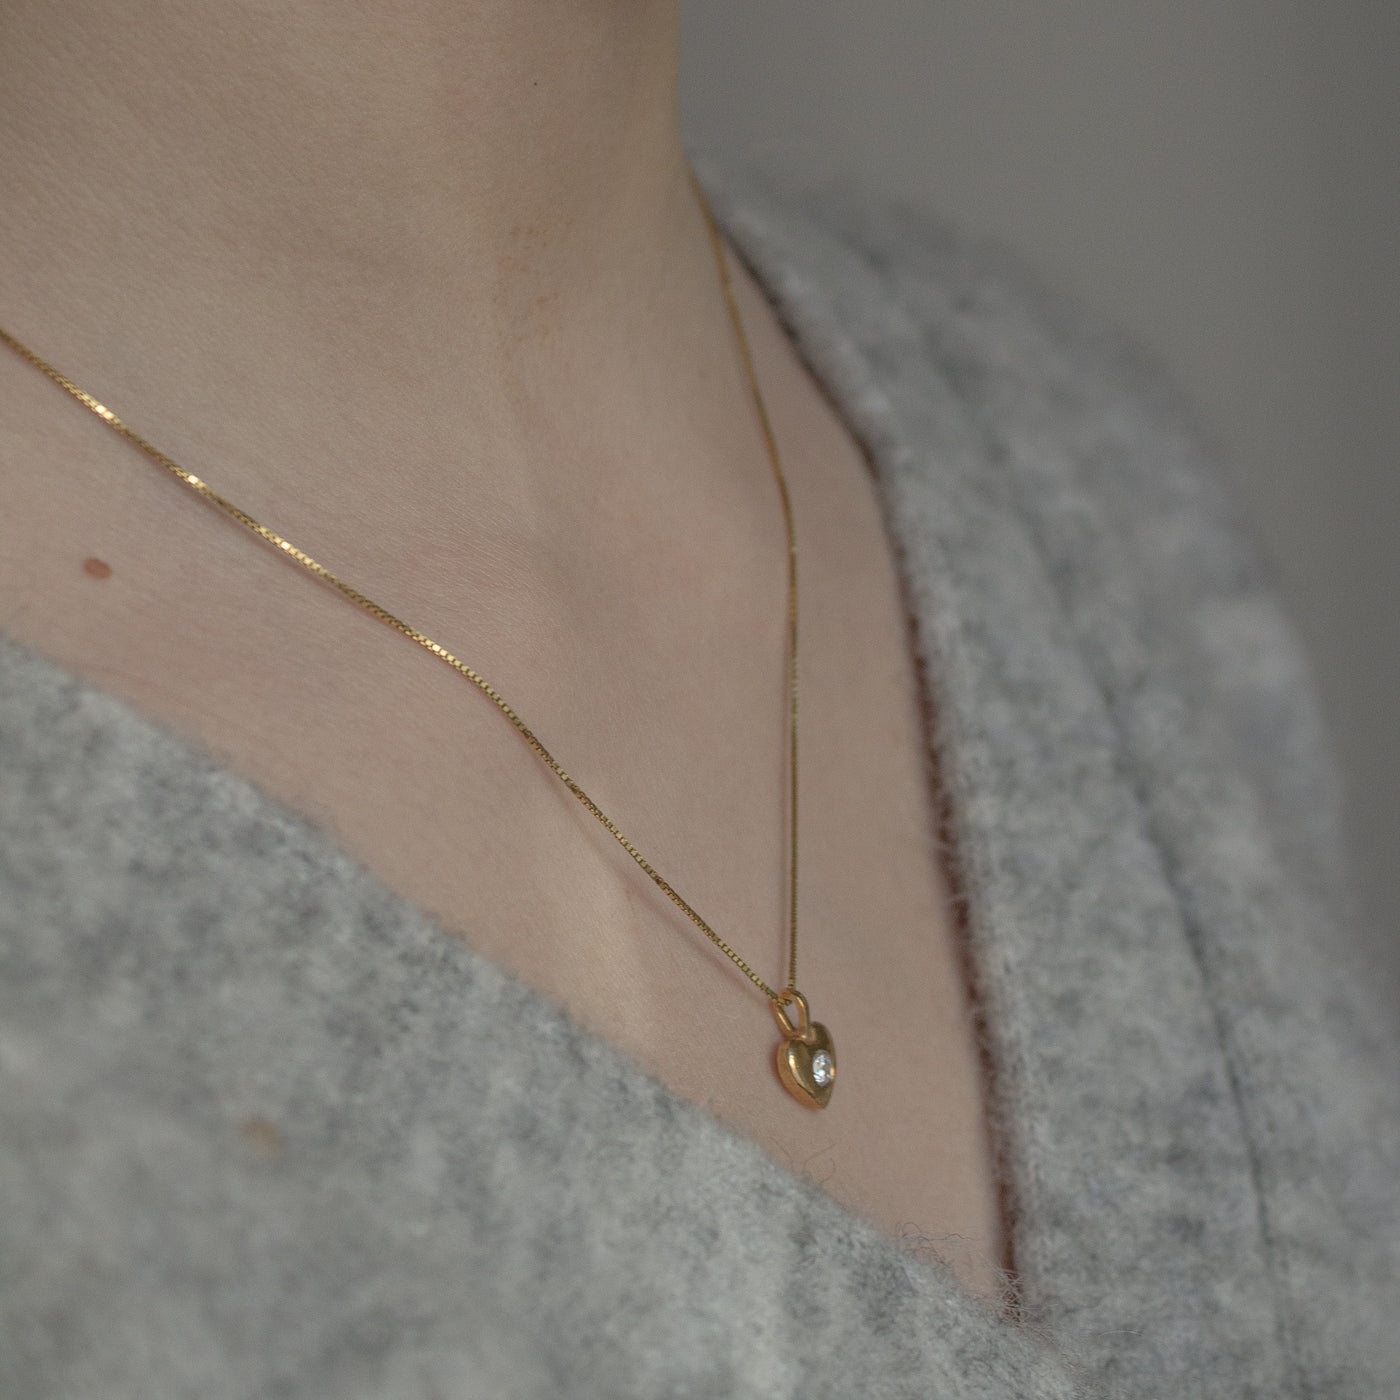 HJERTE // Necklace with heart pendant gold-plated with zirconia